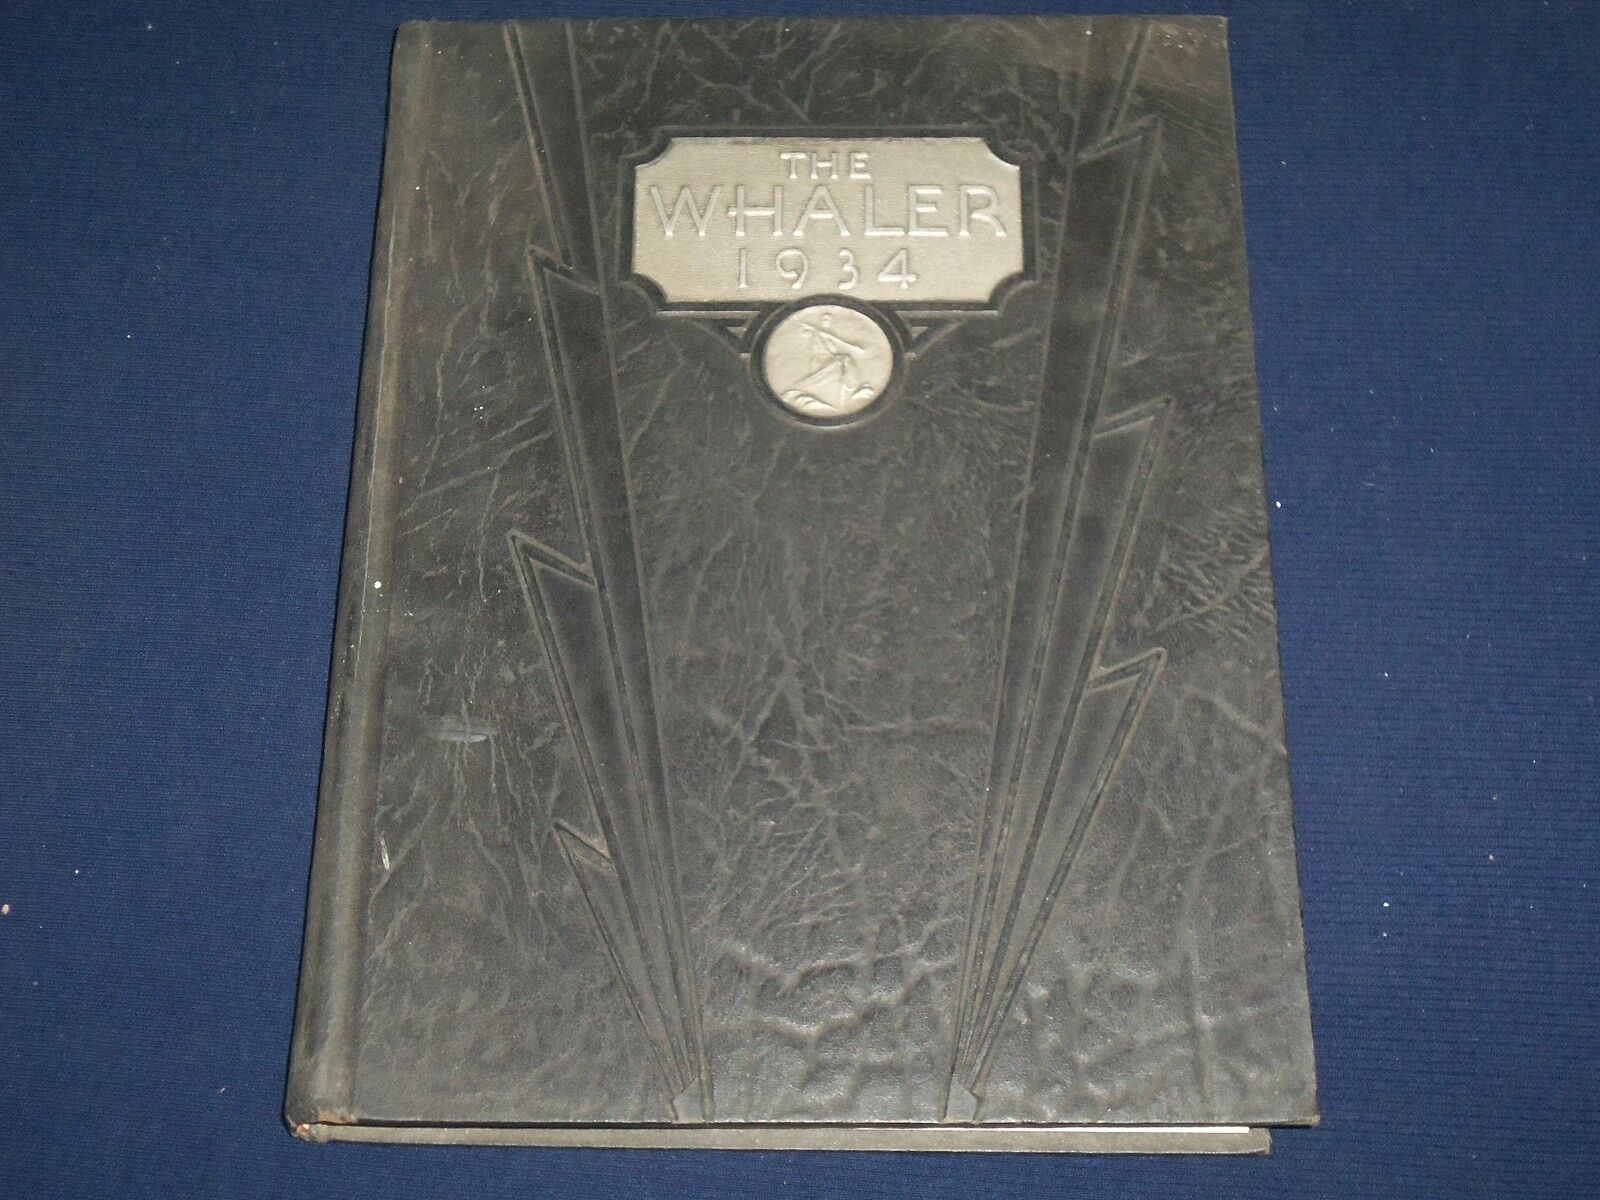 1934 THE WHALER BULKELEY SCHOOL FOR BOYS YEARBOOK - NEW LONDON CT. - YB 595